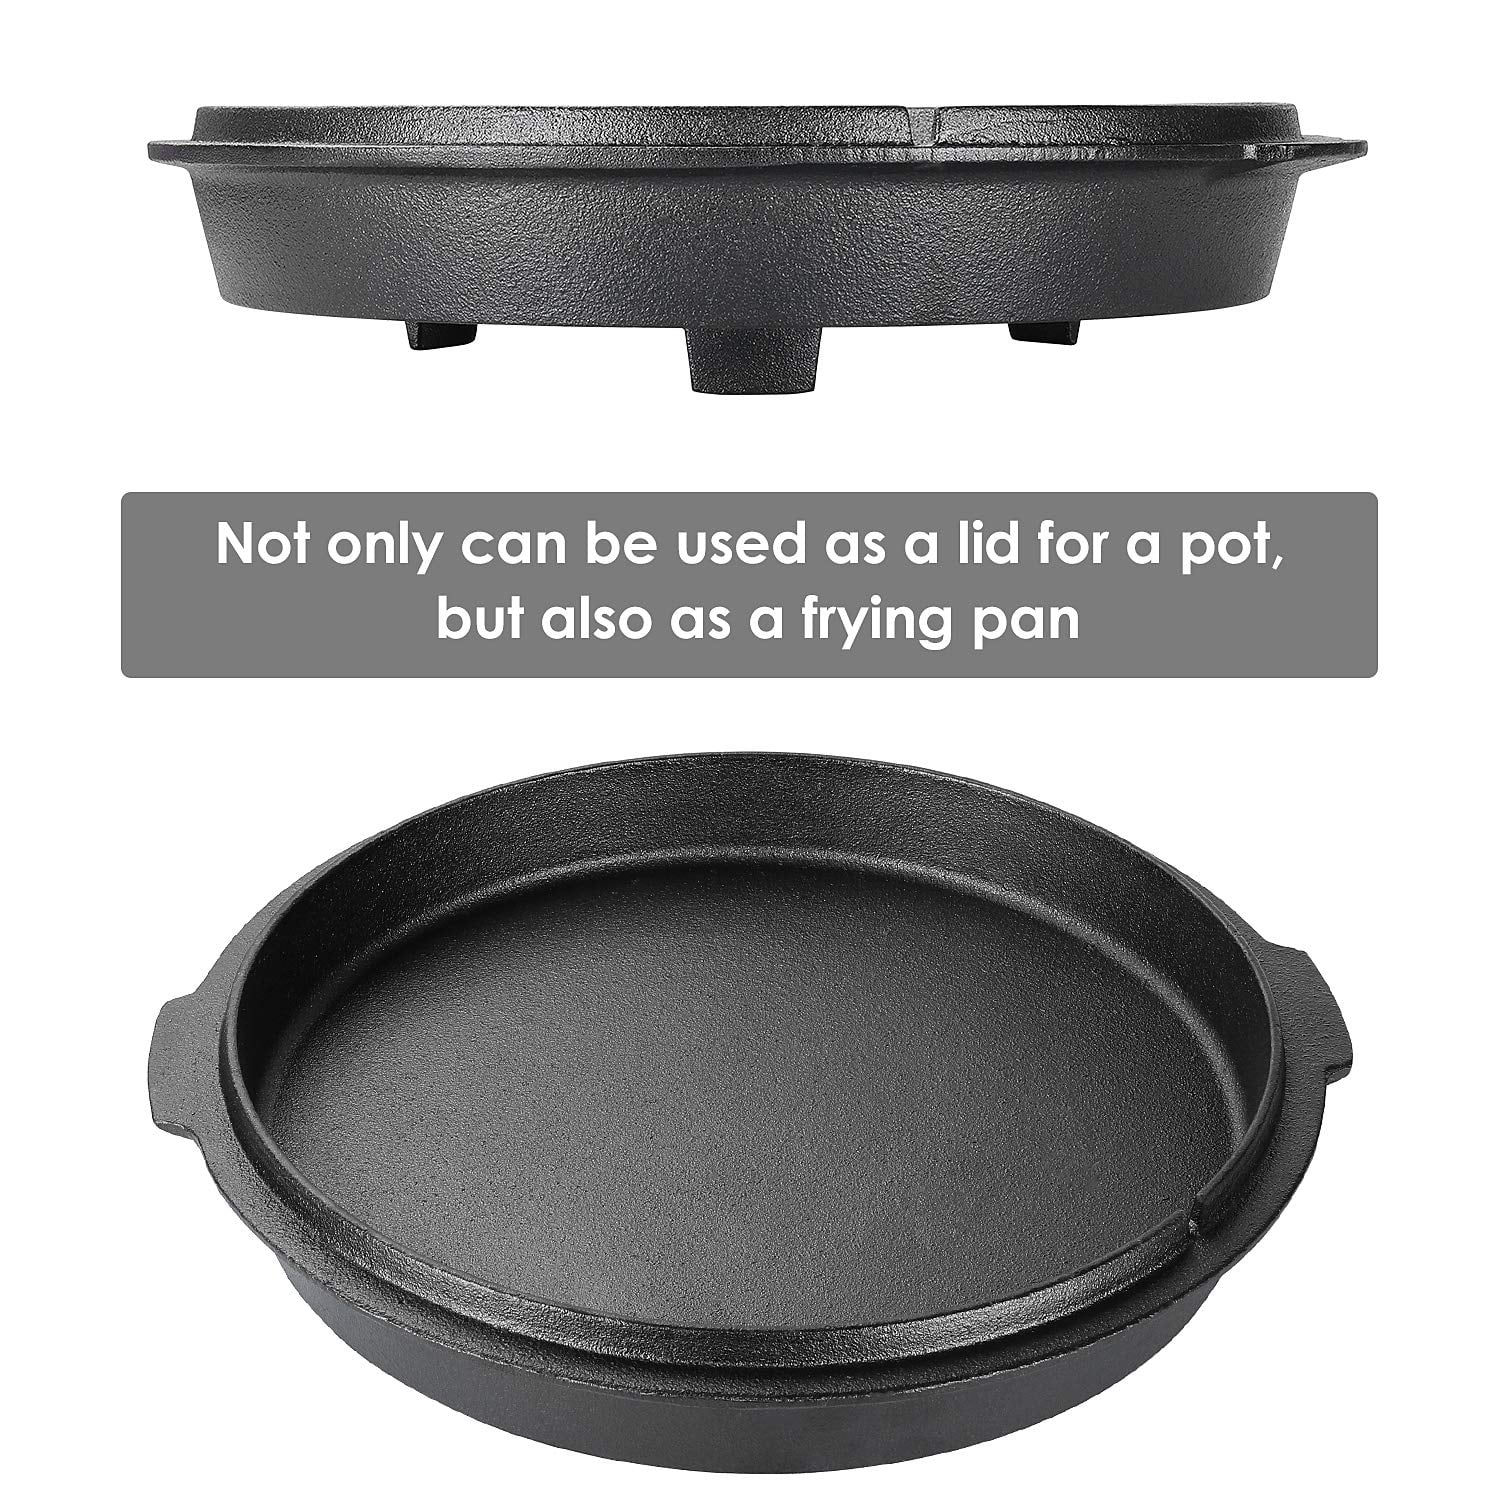 ZQBTC 2 in 1 Cookware Set Cast Iron Dutch Oven Pot 5 qt with 10 inch  Skillet Lid Use on Gas Electric Grill Stovetop BBQ Camping(5 Quart, Black)